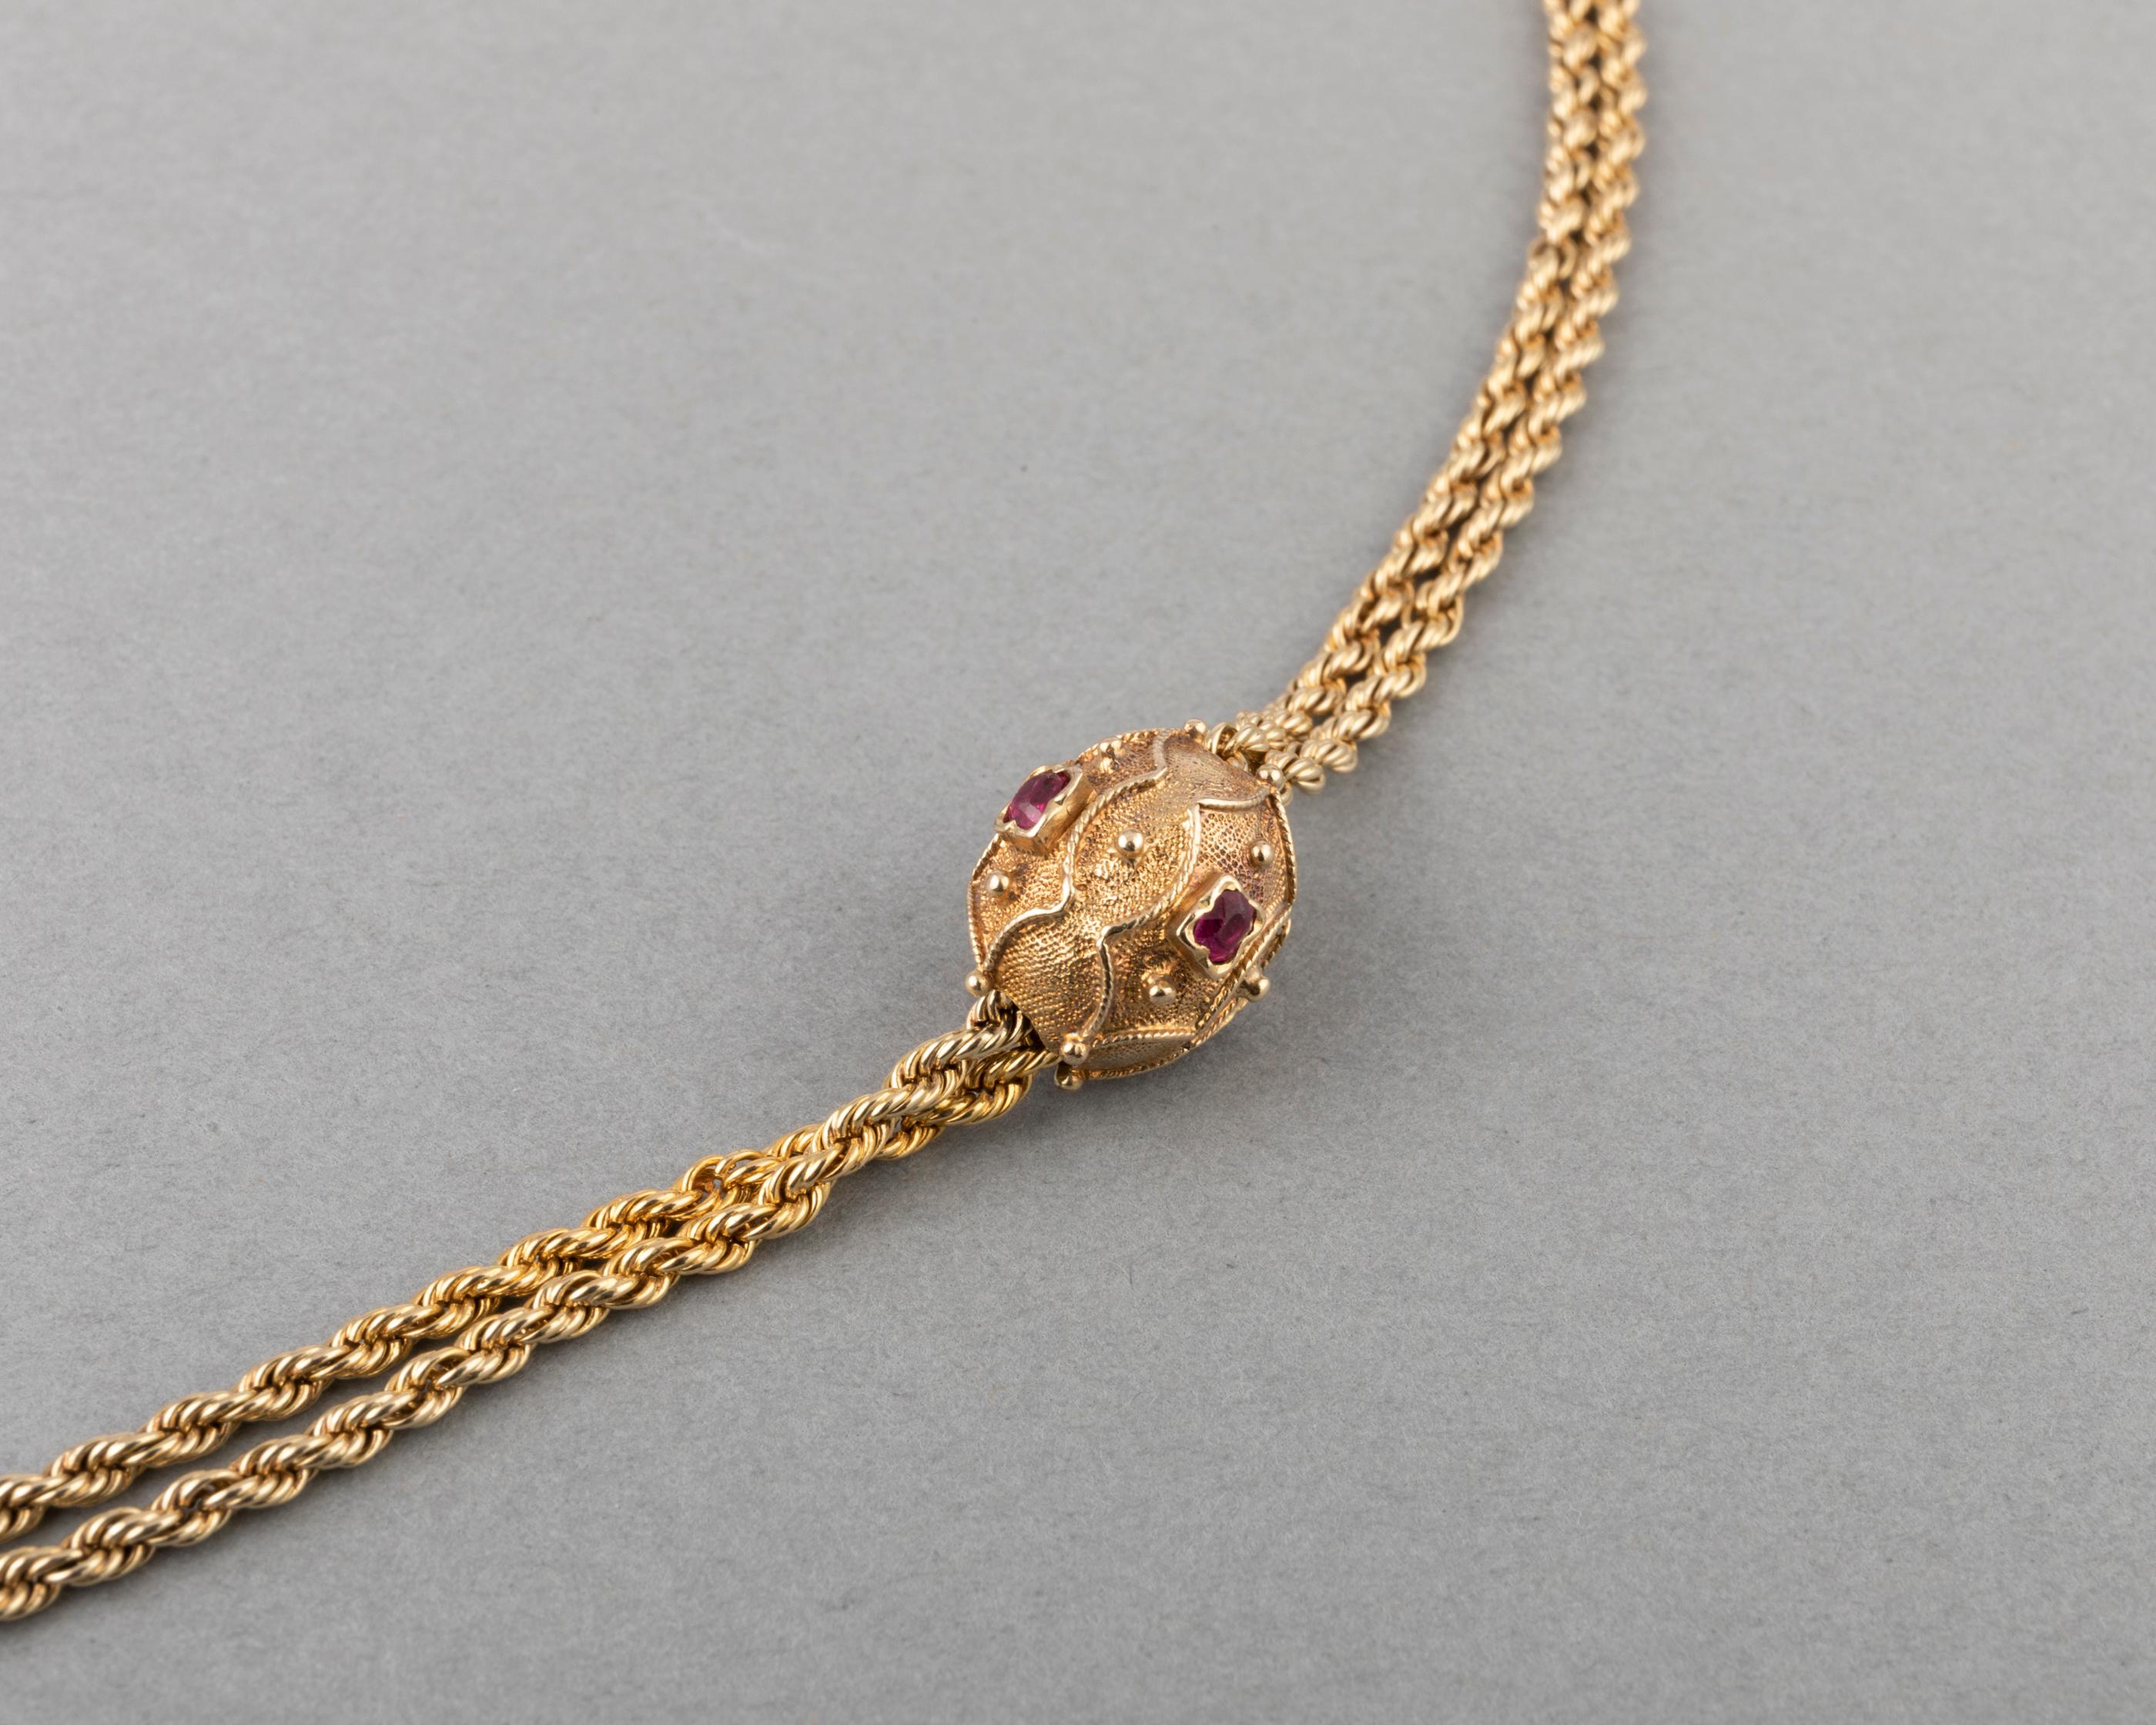 Antique Gold and Rubies French Pompon Necklace 1